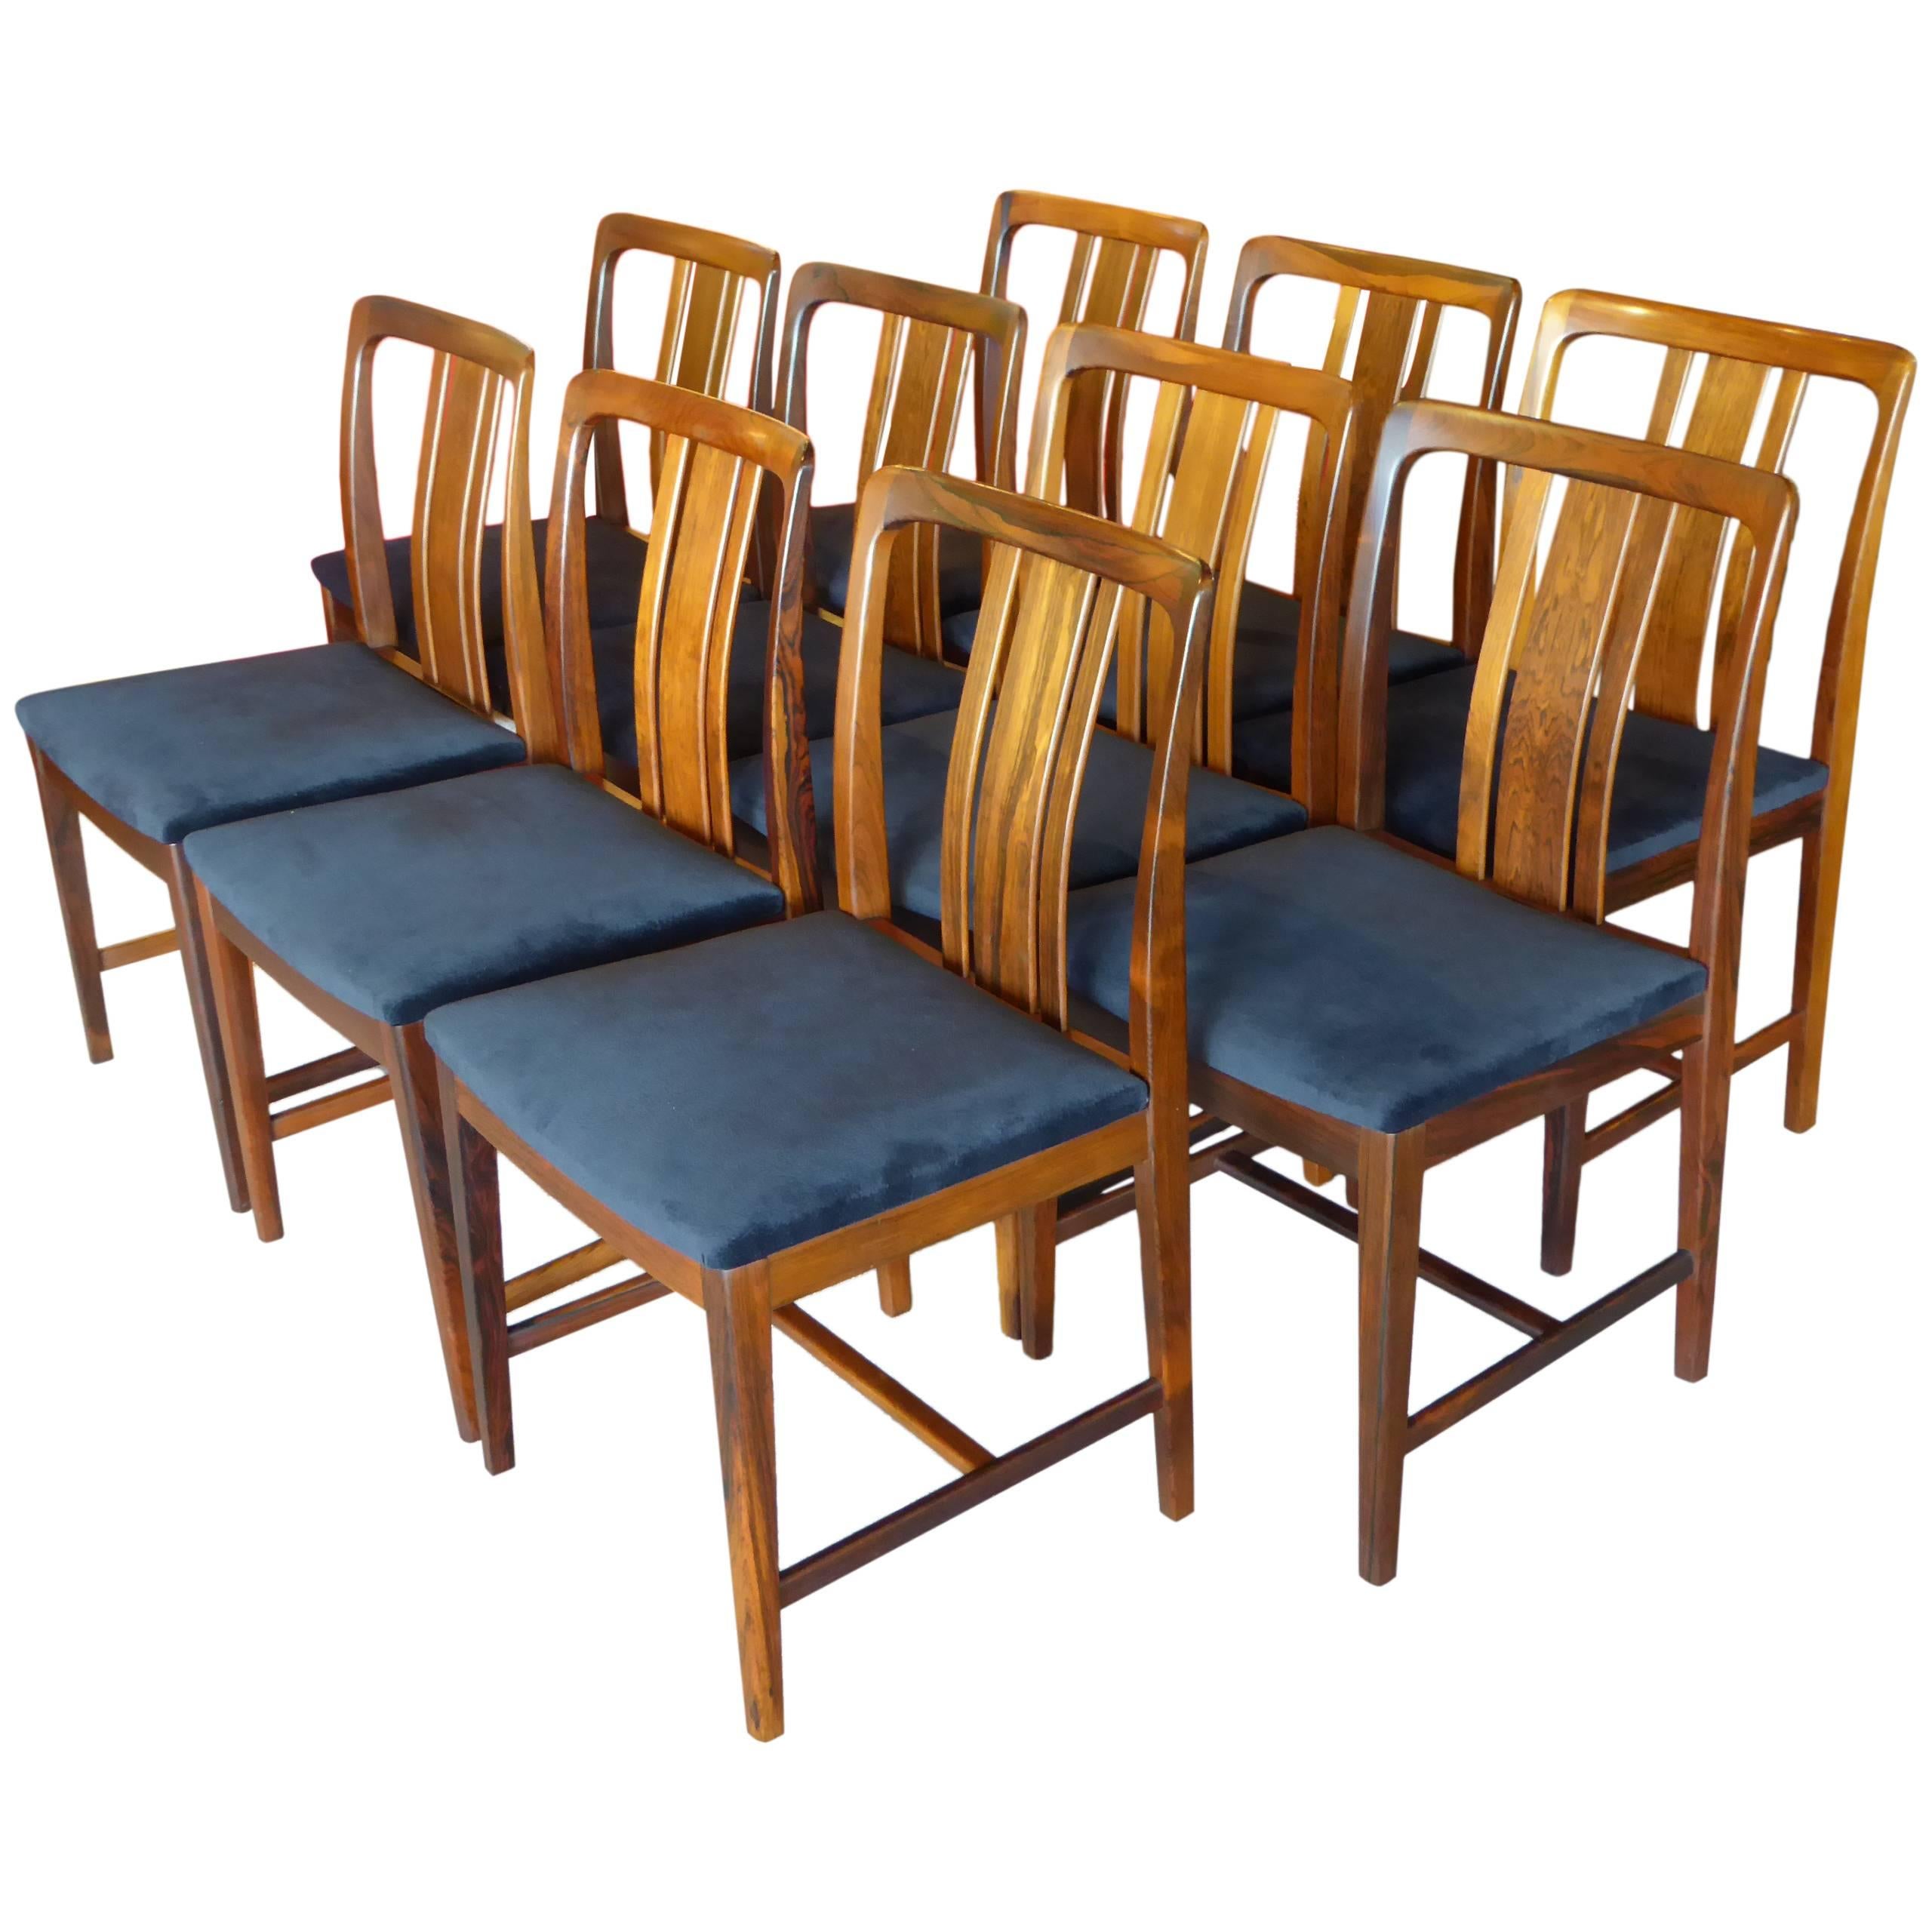 Ten Fine Linde Nilsson Rosewood Modern Dining Chairs, Sweden